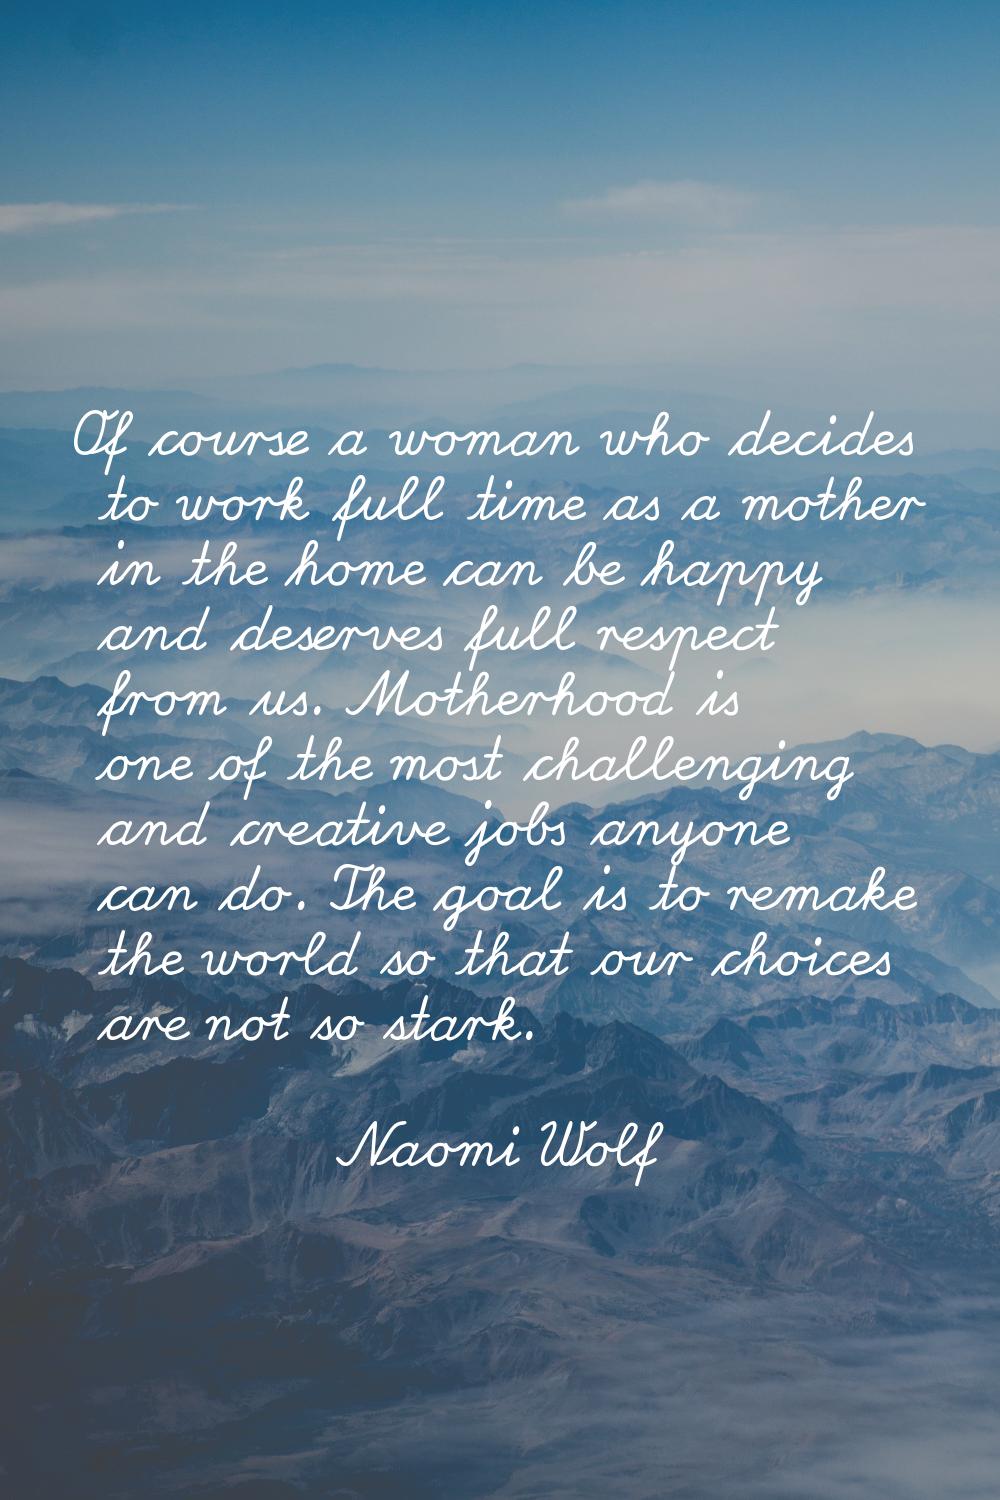 Of course a woman who decides to work full time as a mother in the home can be happy and deserves f